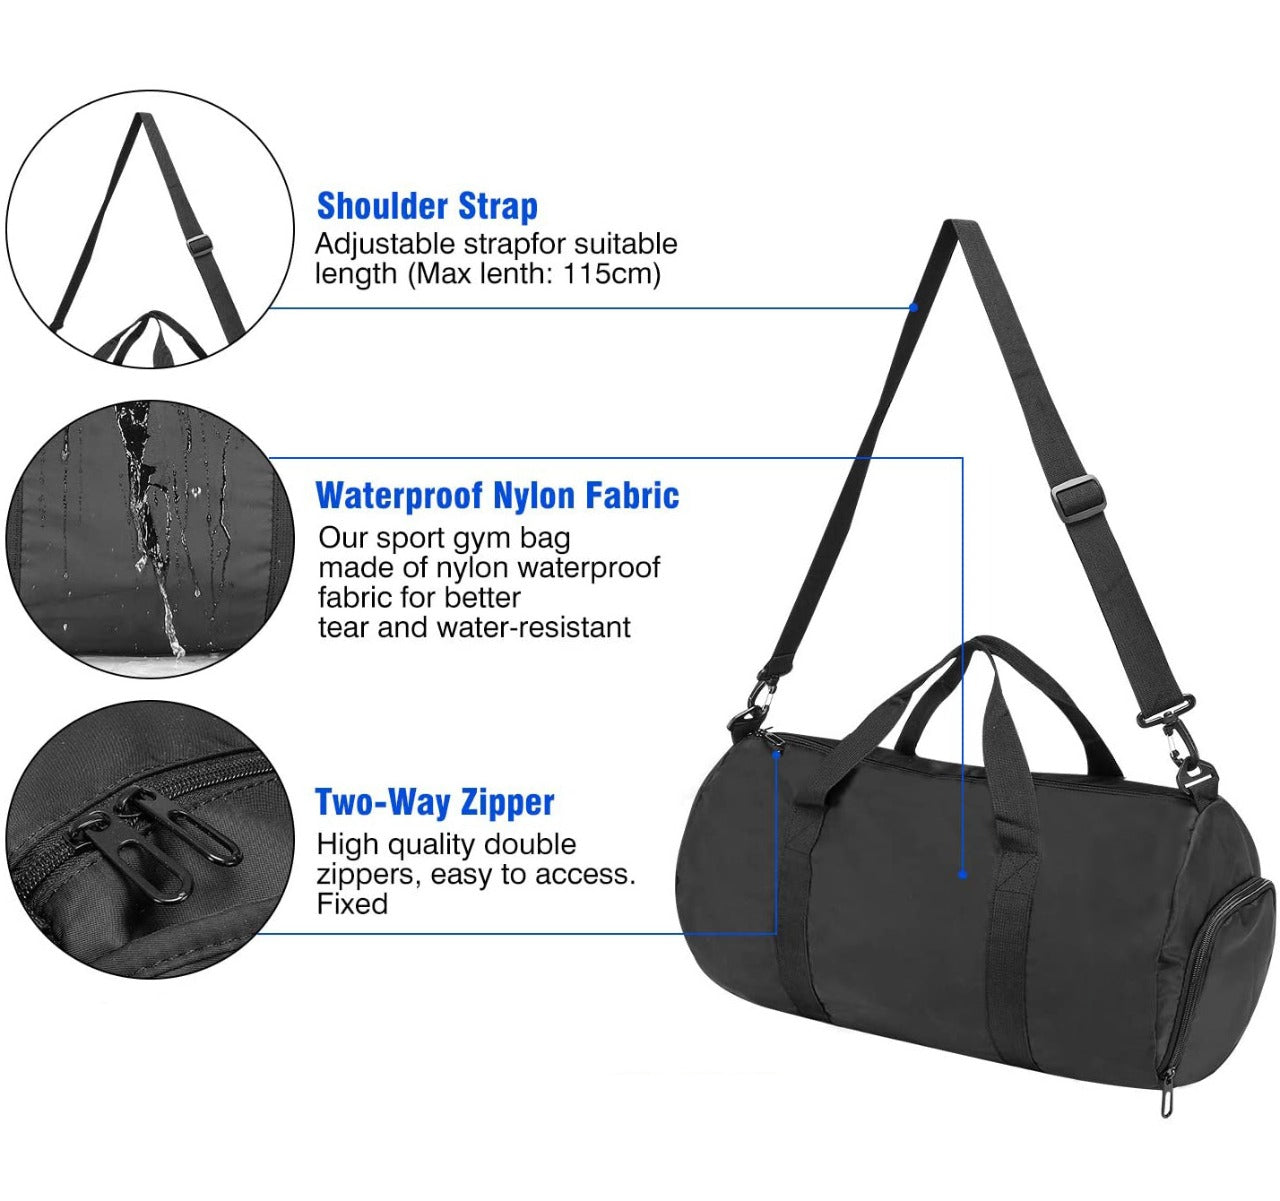 Gym Duffle Bag Barrel Bag With Shoe Compartment Repton Fitness Gear